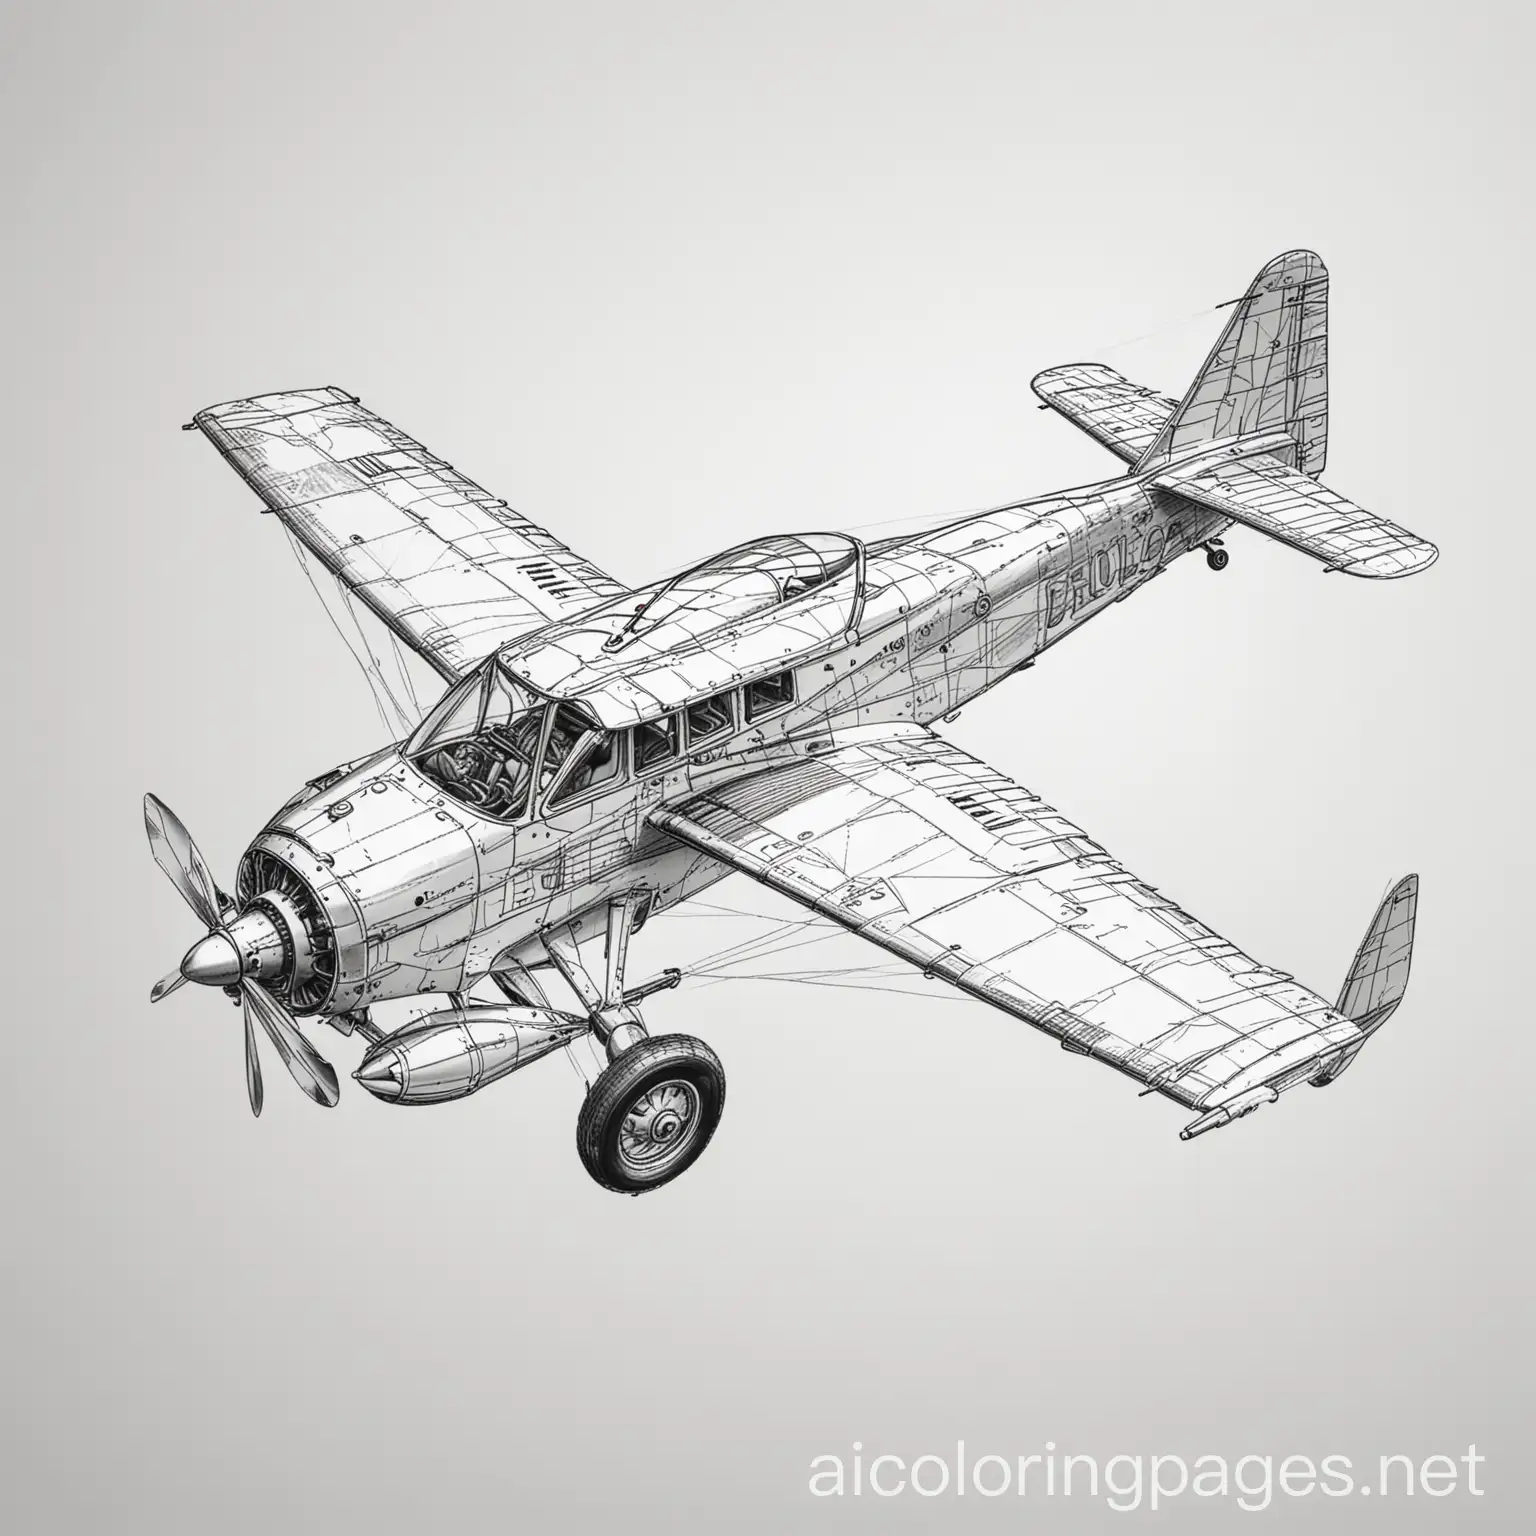 Simple-Black-and-White-Coloring-Page-of-a-Flying-Plane